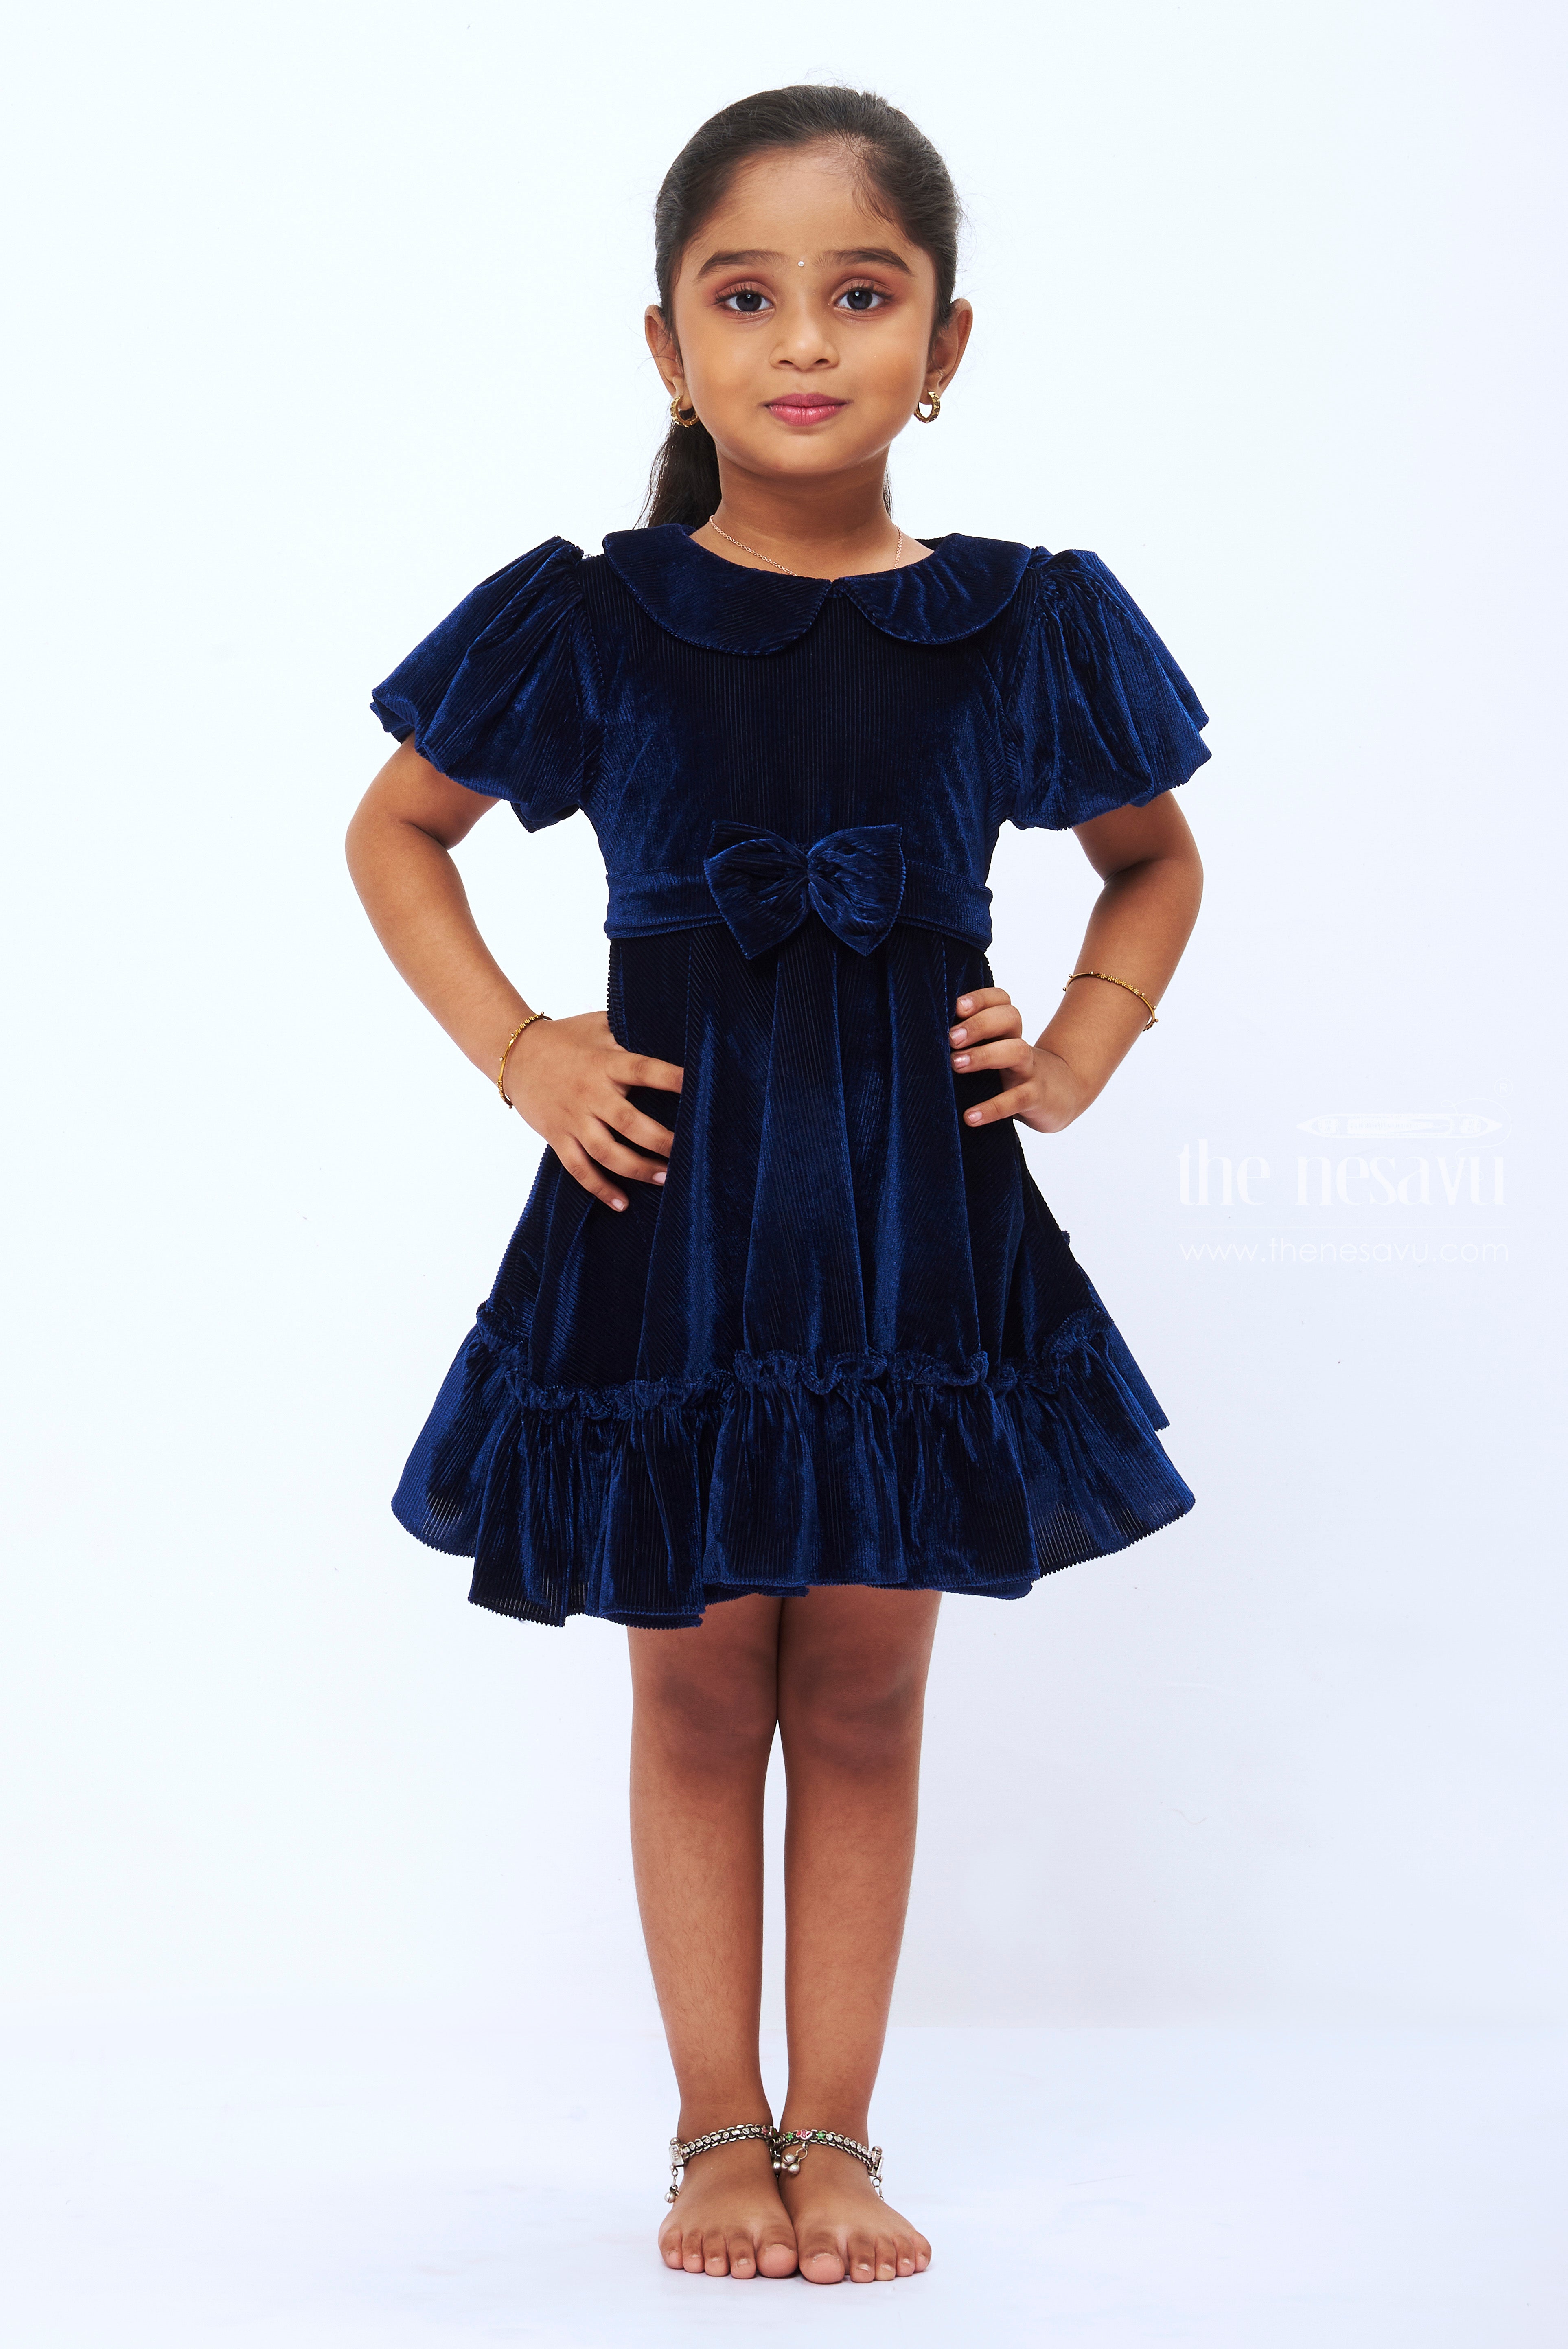 Autumn & Winter Lace Patchwork Velvet Girls Christmas Dress For Girls  Toddler Clothes #5412 201203 From Kong06, $17.58 | DHgate.Com